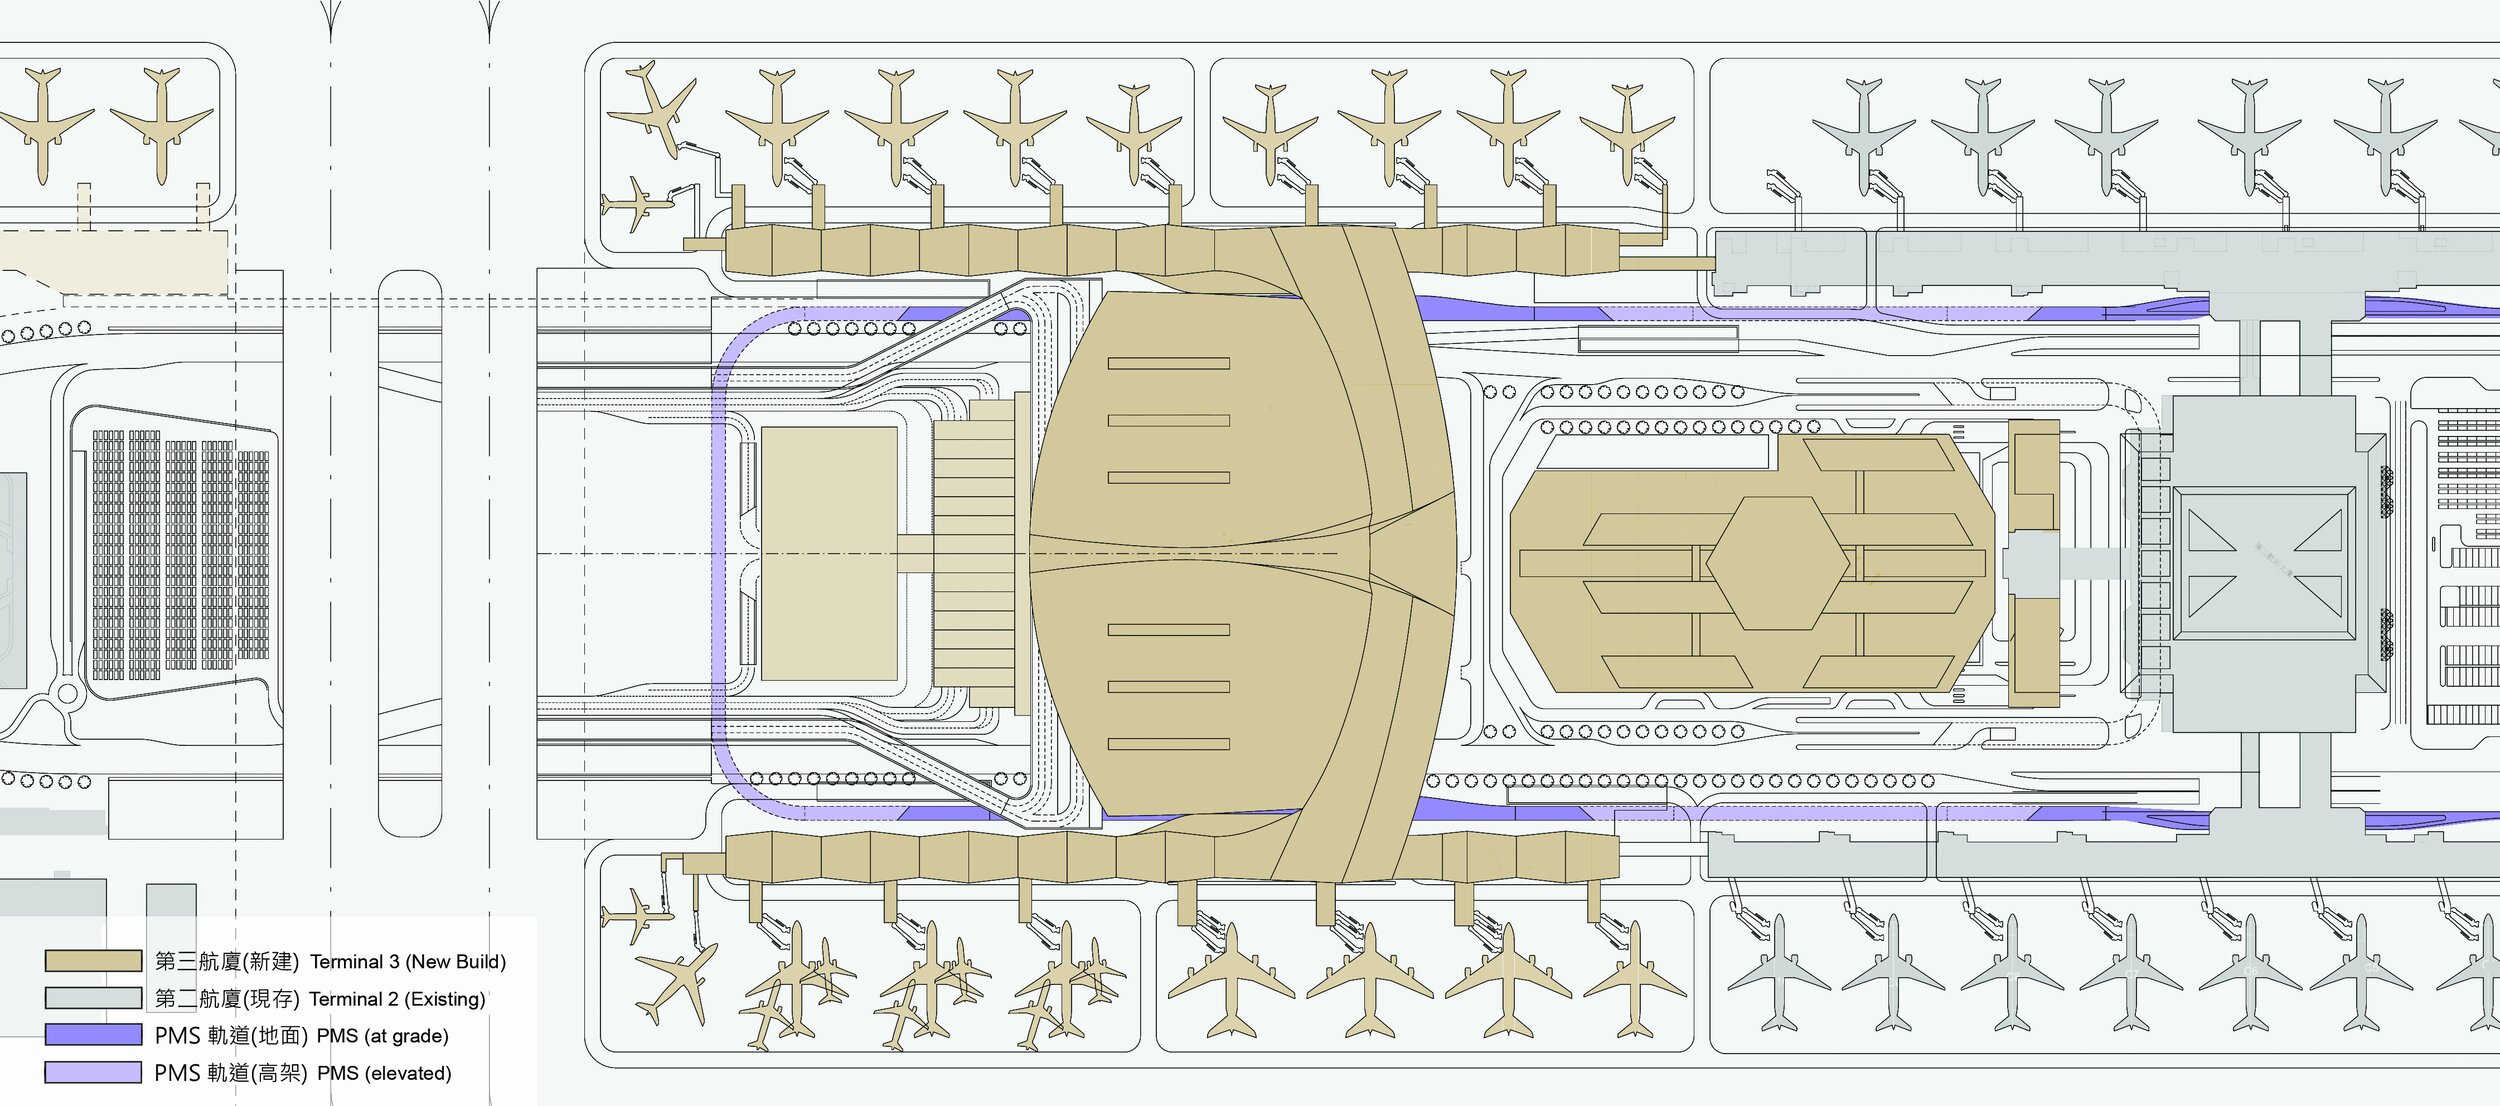 Site plan of T3 at TPE